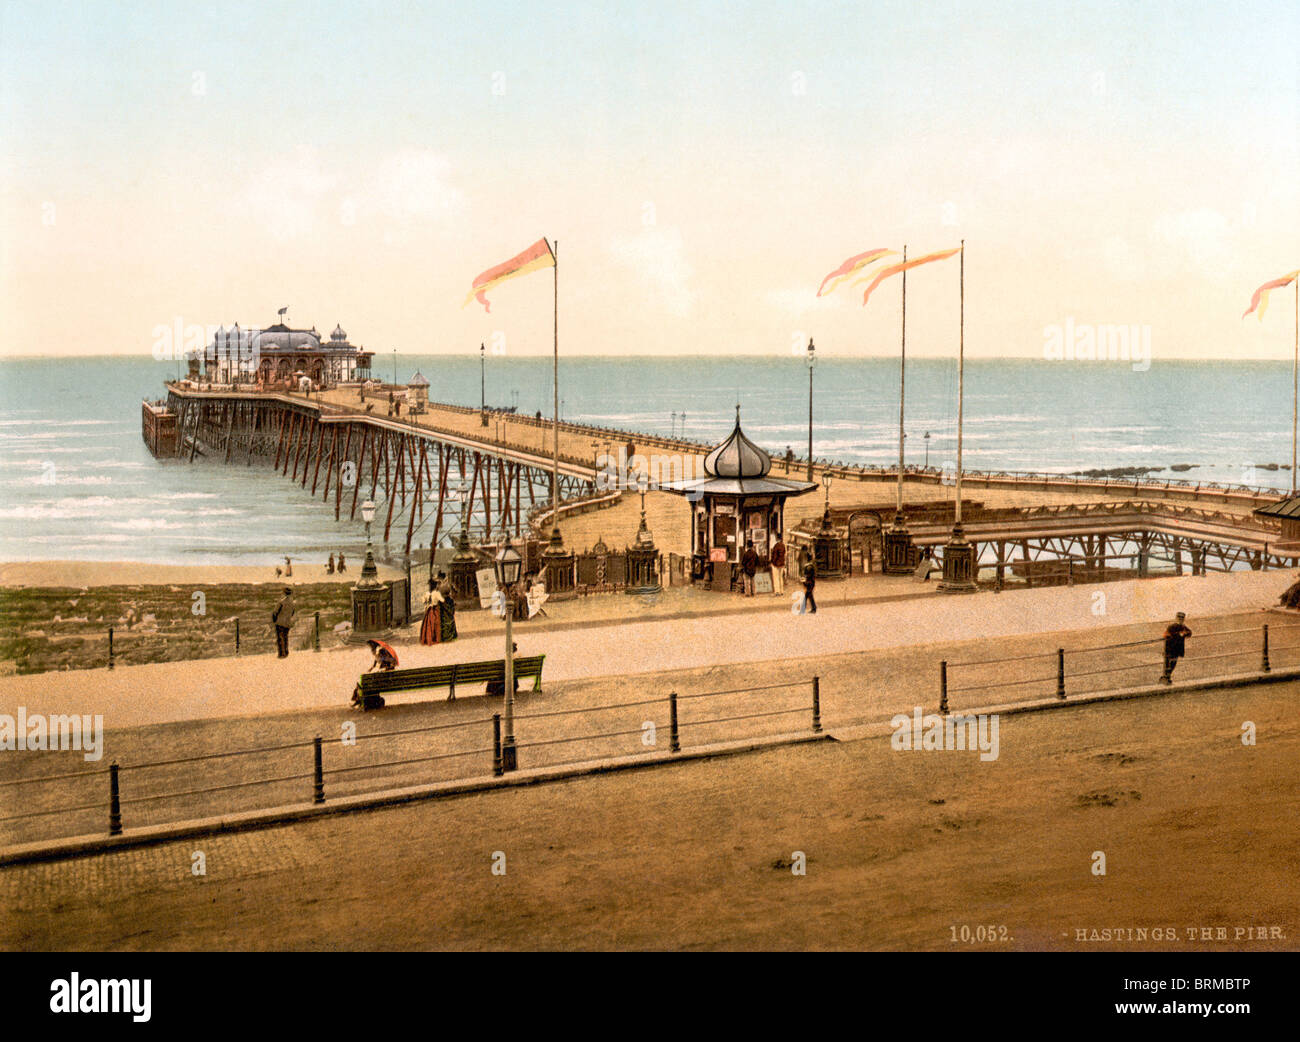 Historic photochrome colour print circa 1894 - 1900 of Hastings Pier in East Sussex, England. Stock Photo